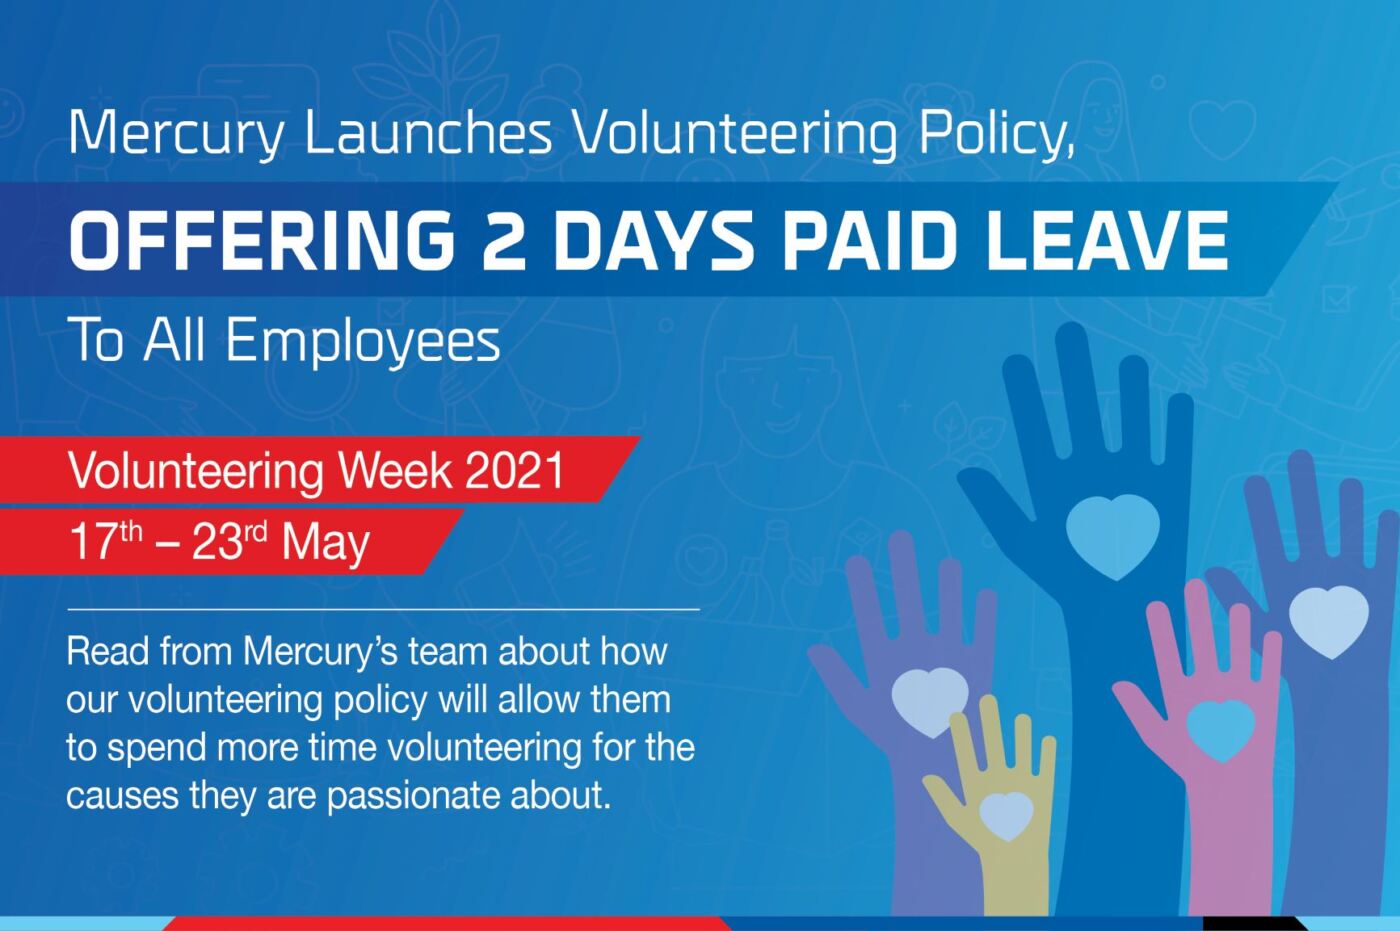 Mercury will provide two fully paid volunteering days to all staff